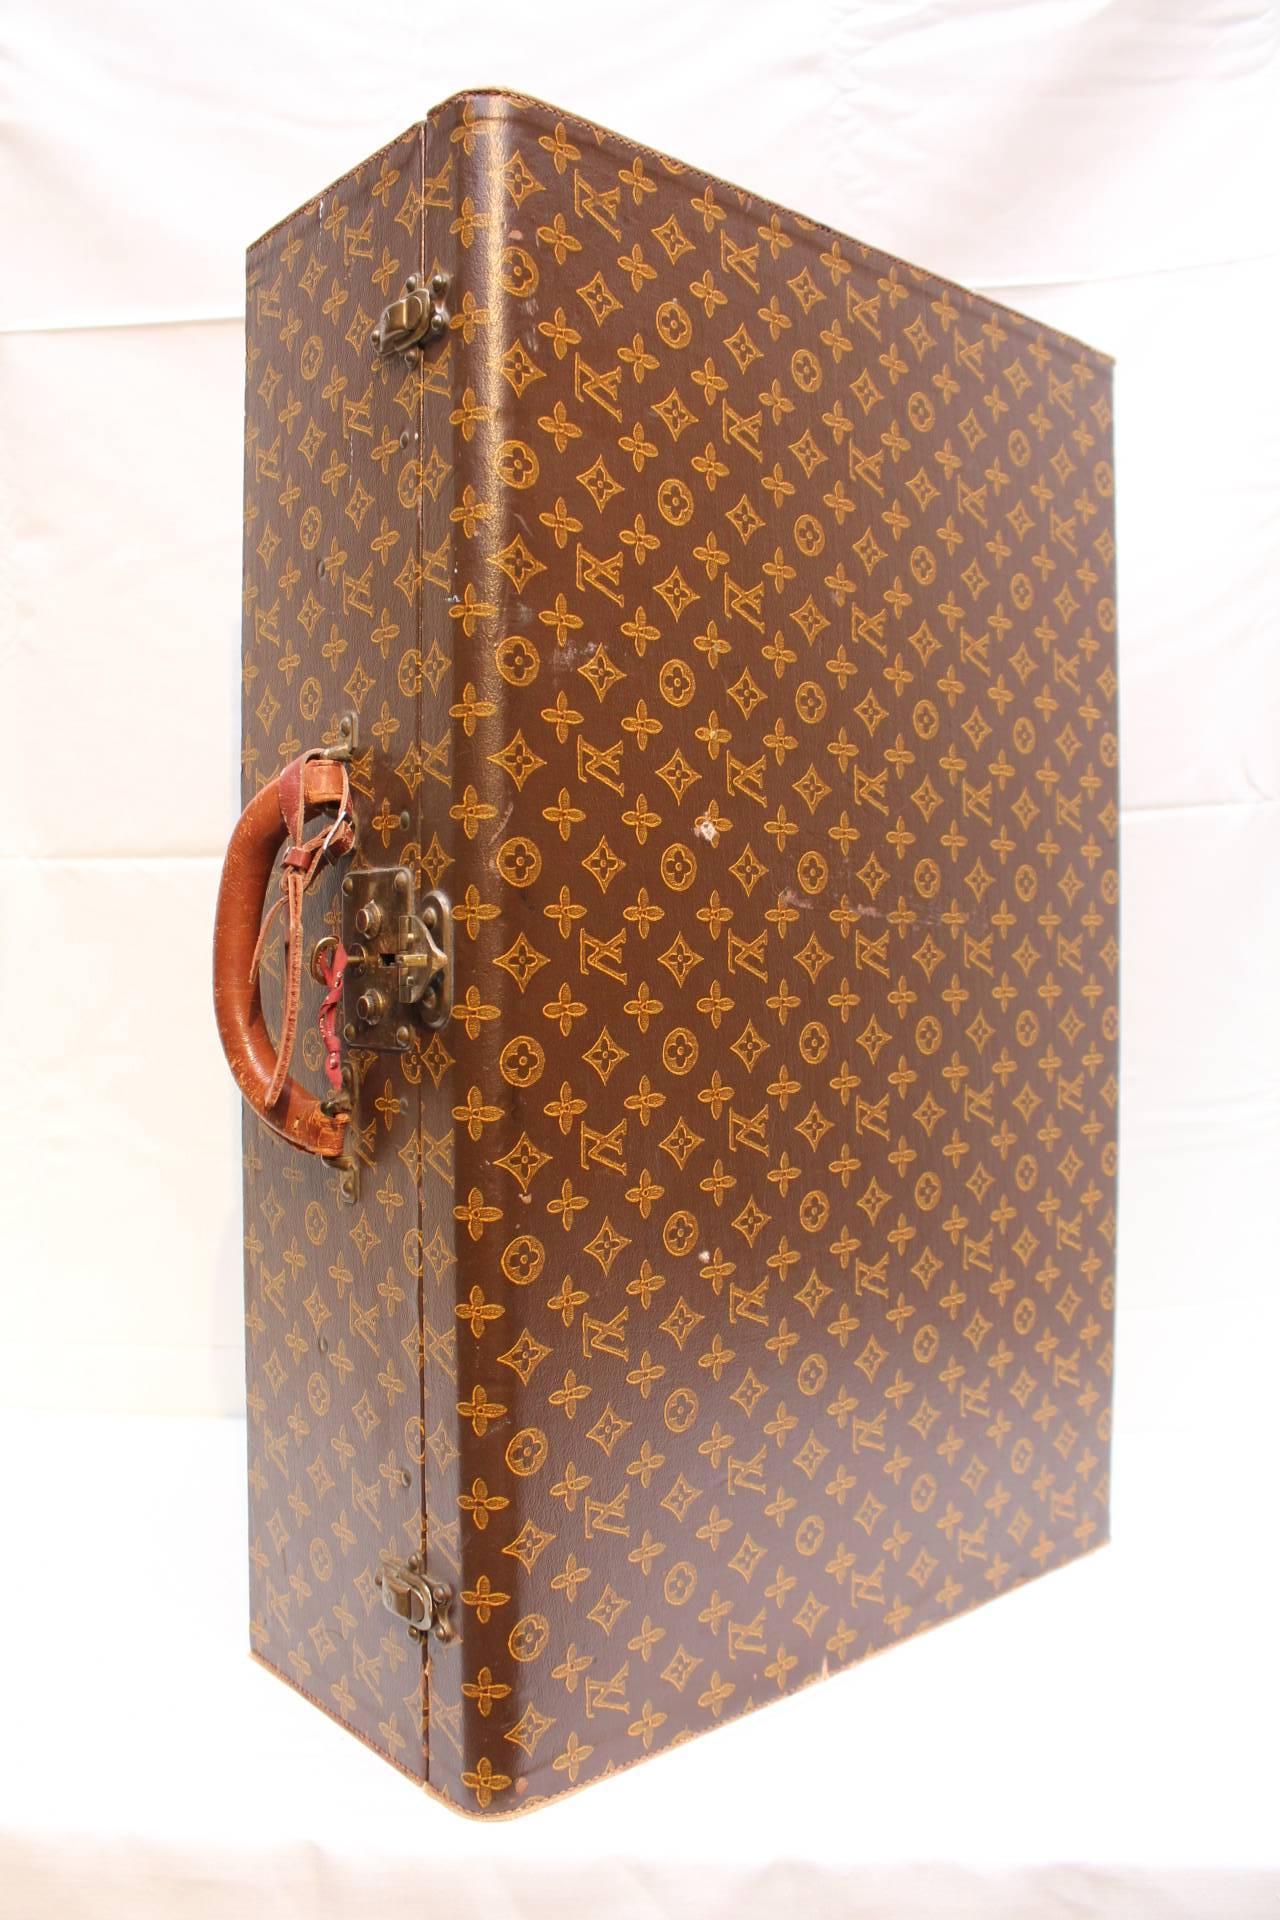 Authentic and beautiful Louis Vuitton monogram suitcase, made in the 1940's, with canvas with 